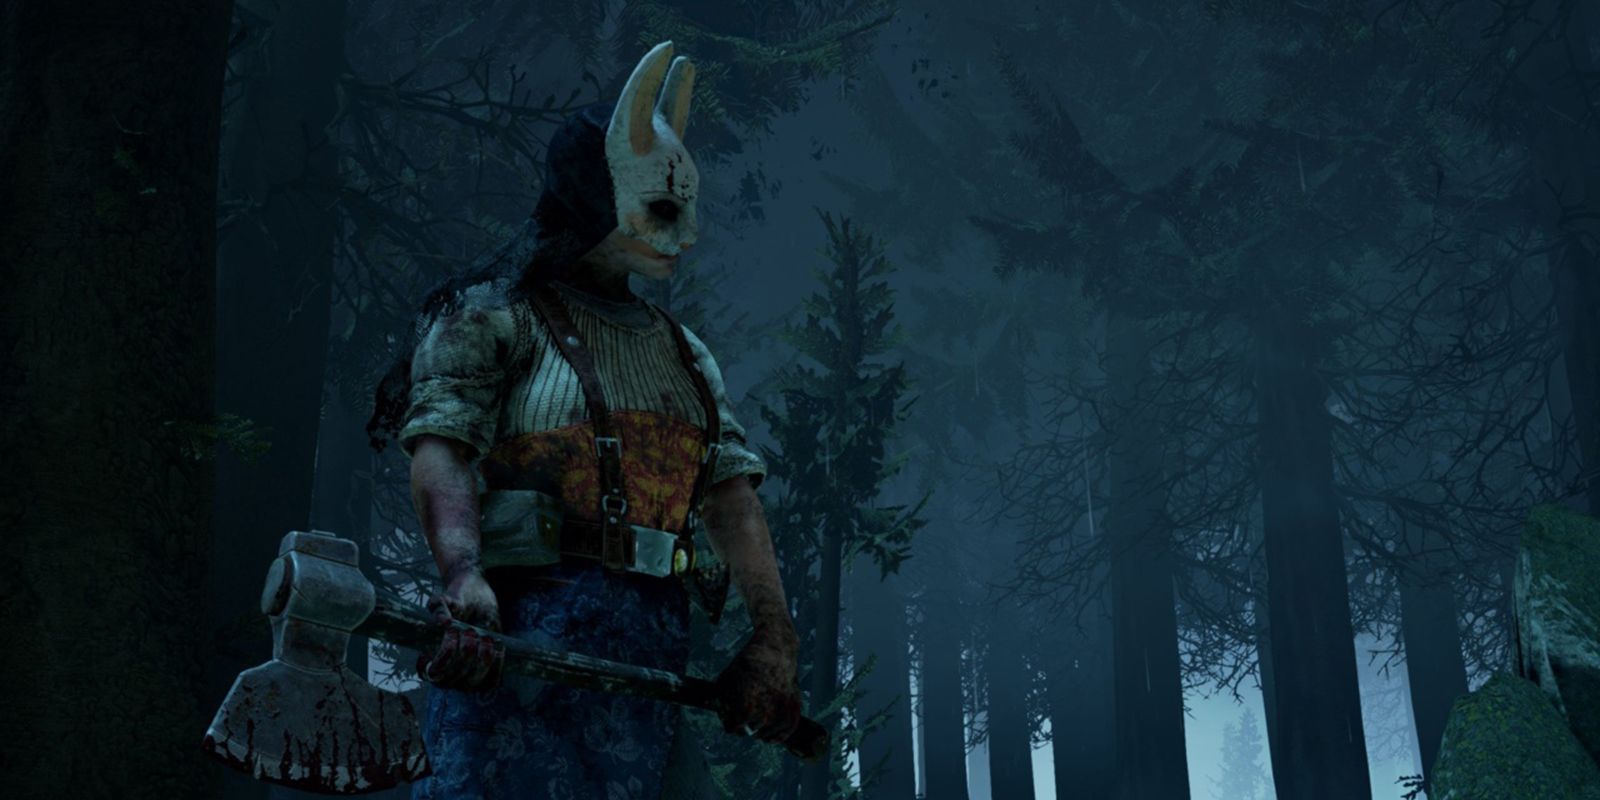 Huntress with an axe